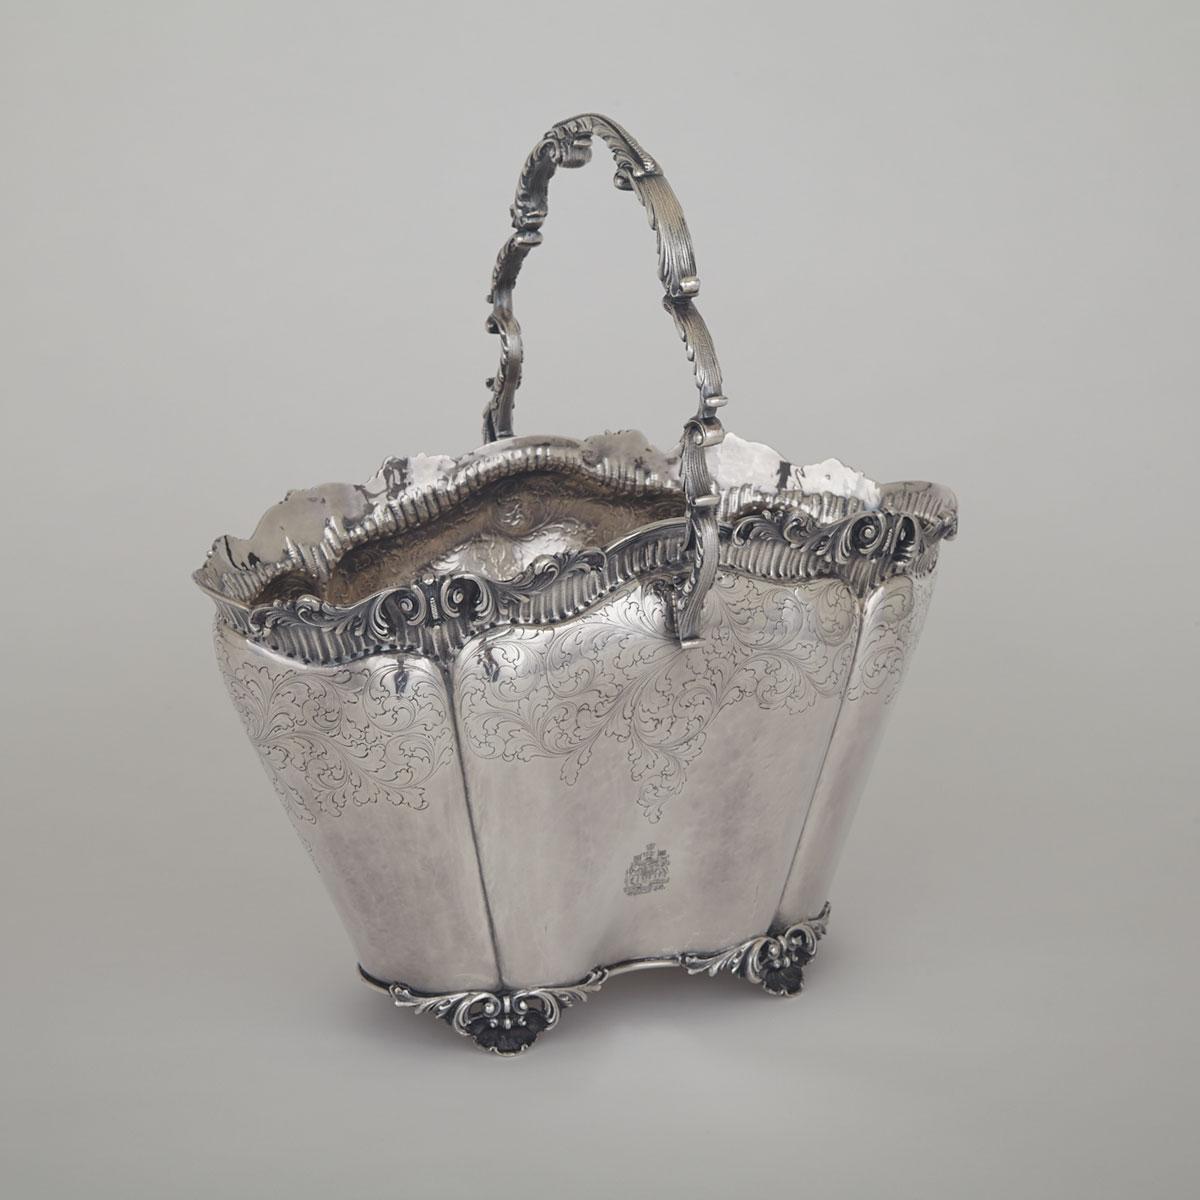 Italian Silver Wine Cooler, for Henry Birks of Montreal, c. 1910